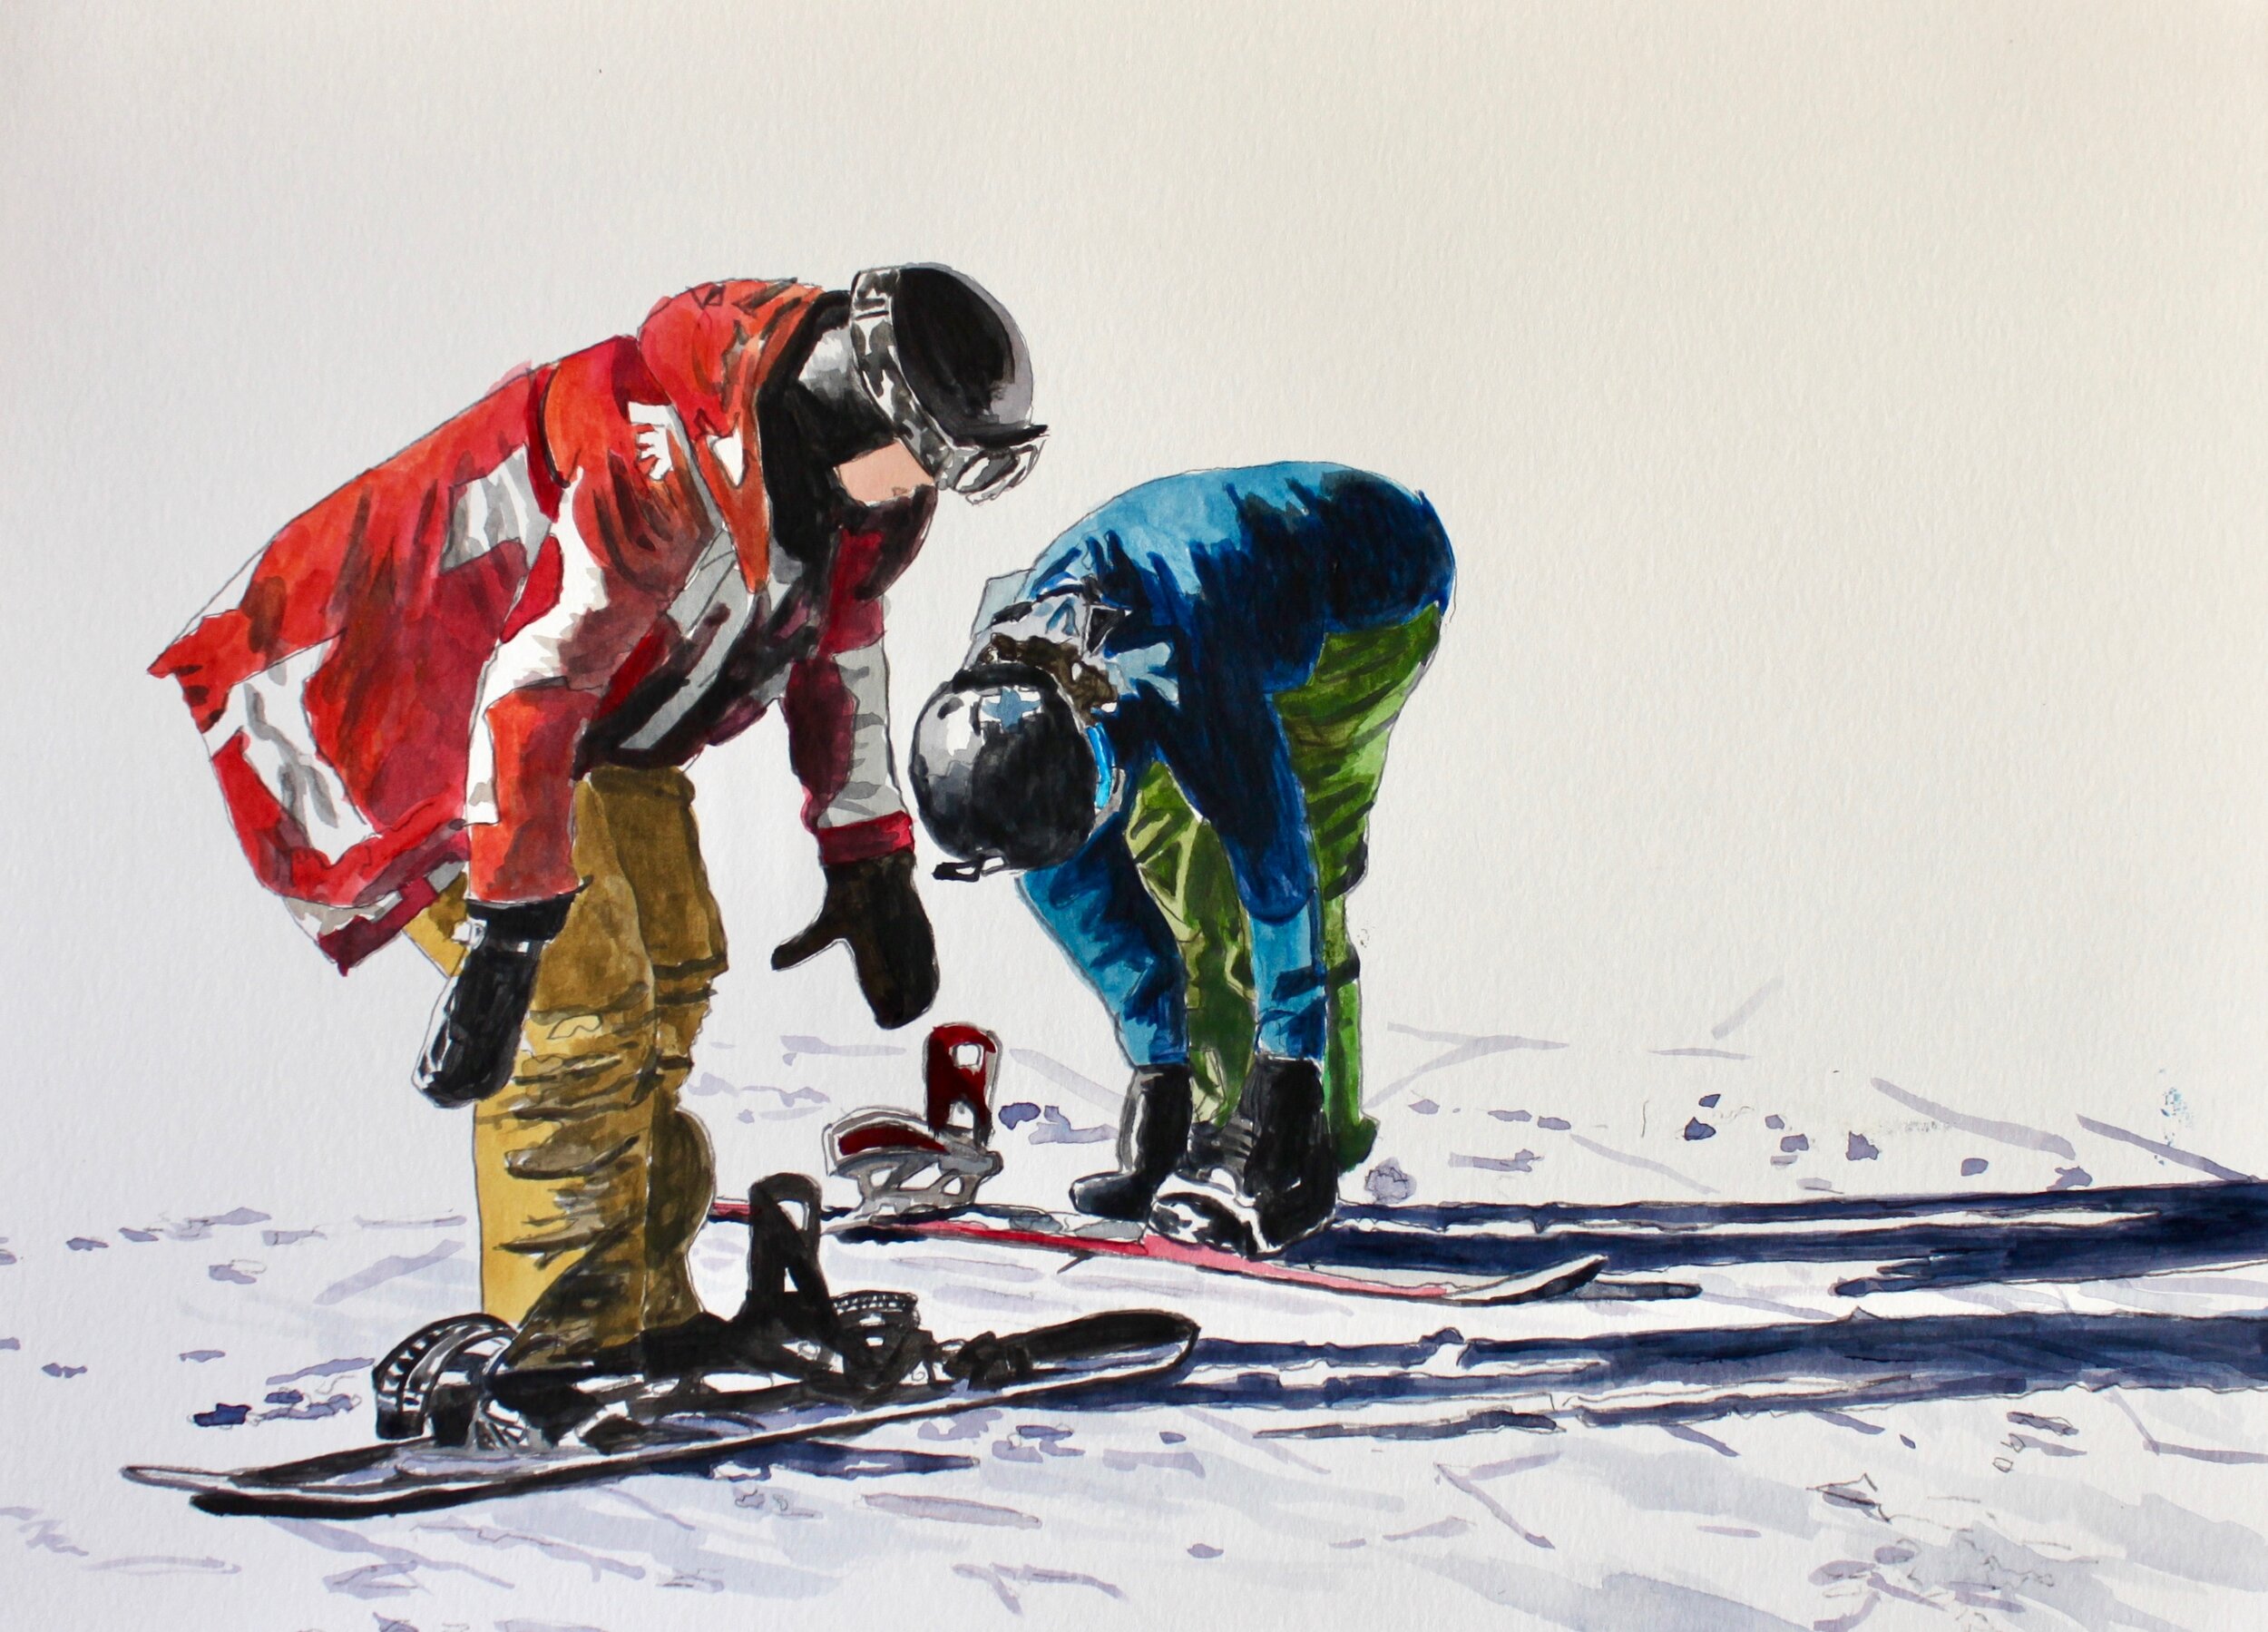 Untitled, Snowboarders, 2020, 11 x 15, acrylic on paper